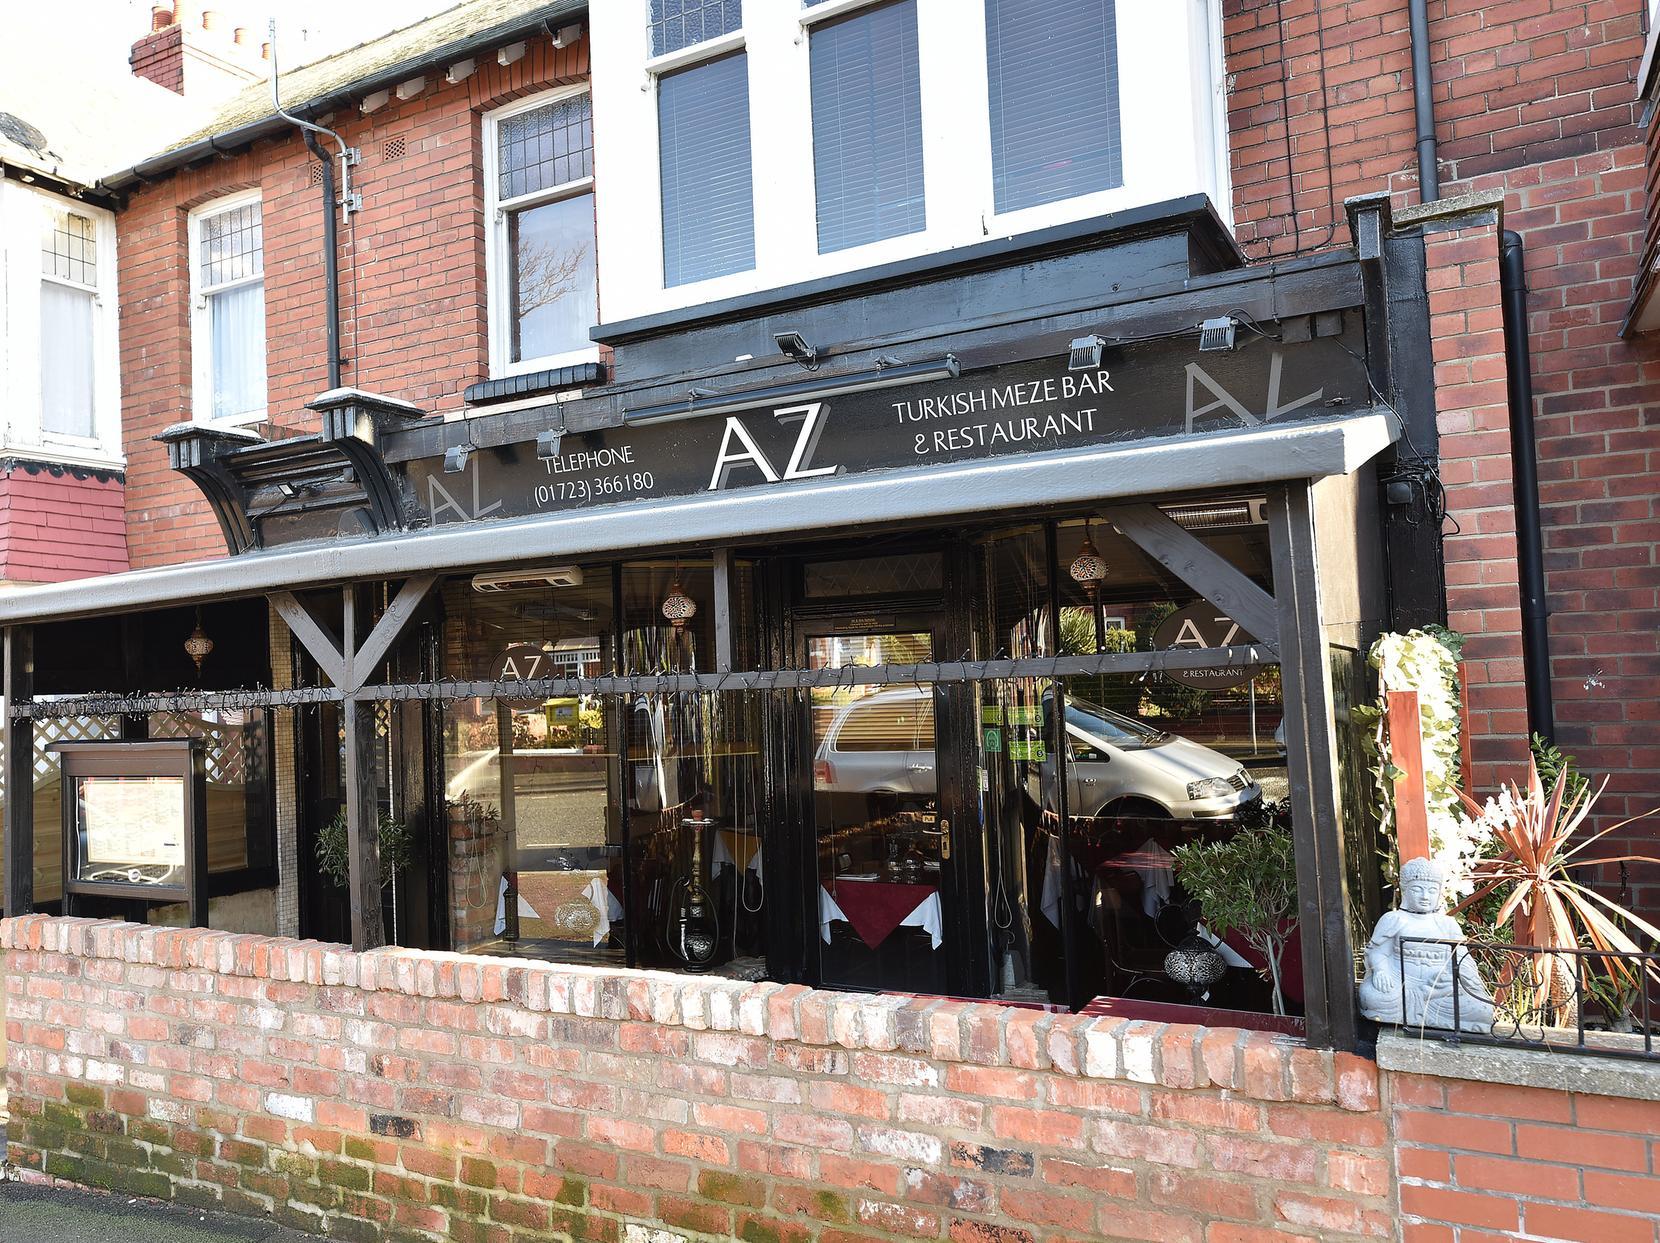 A reviewer said: AZ restaurant is fantastic and is one of the best in Scarborough if not 'the best'. Clean, tidy, immaculate. Atmosphere is wonderful and service is second to none.